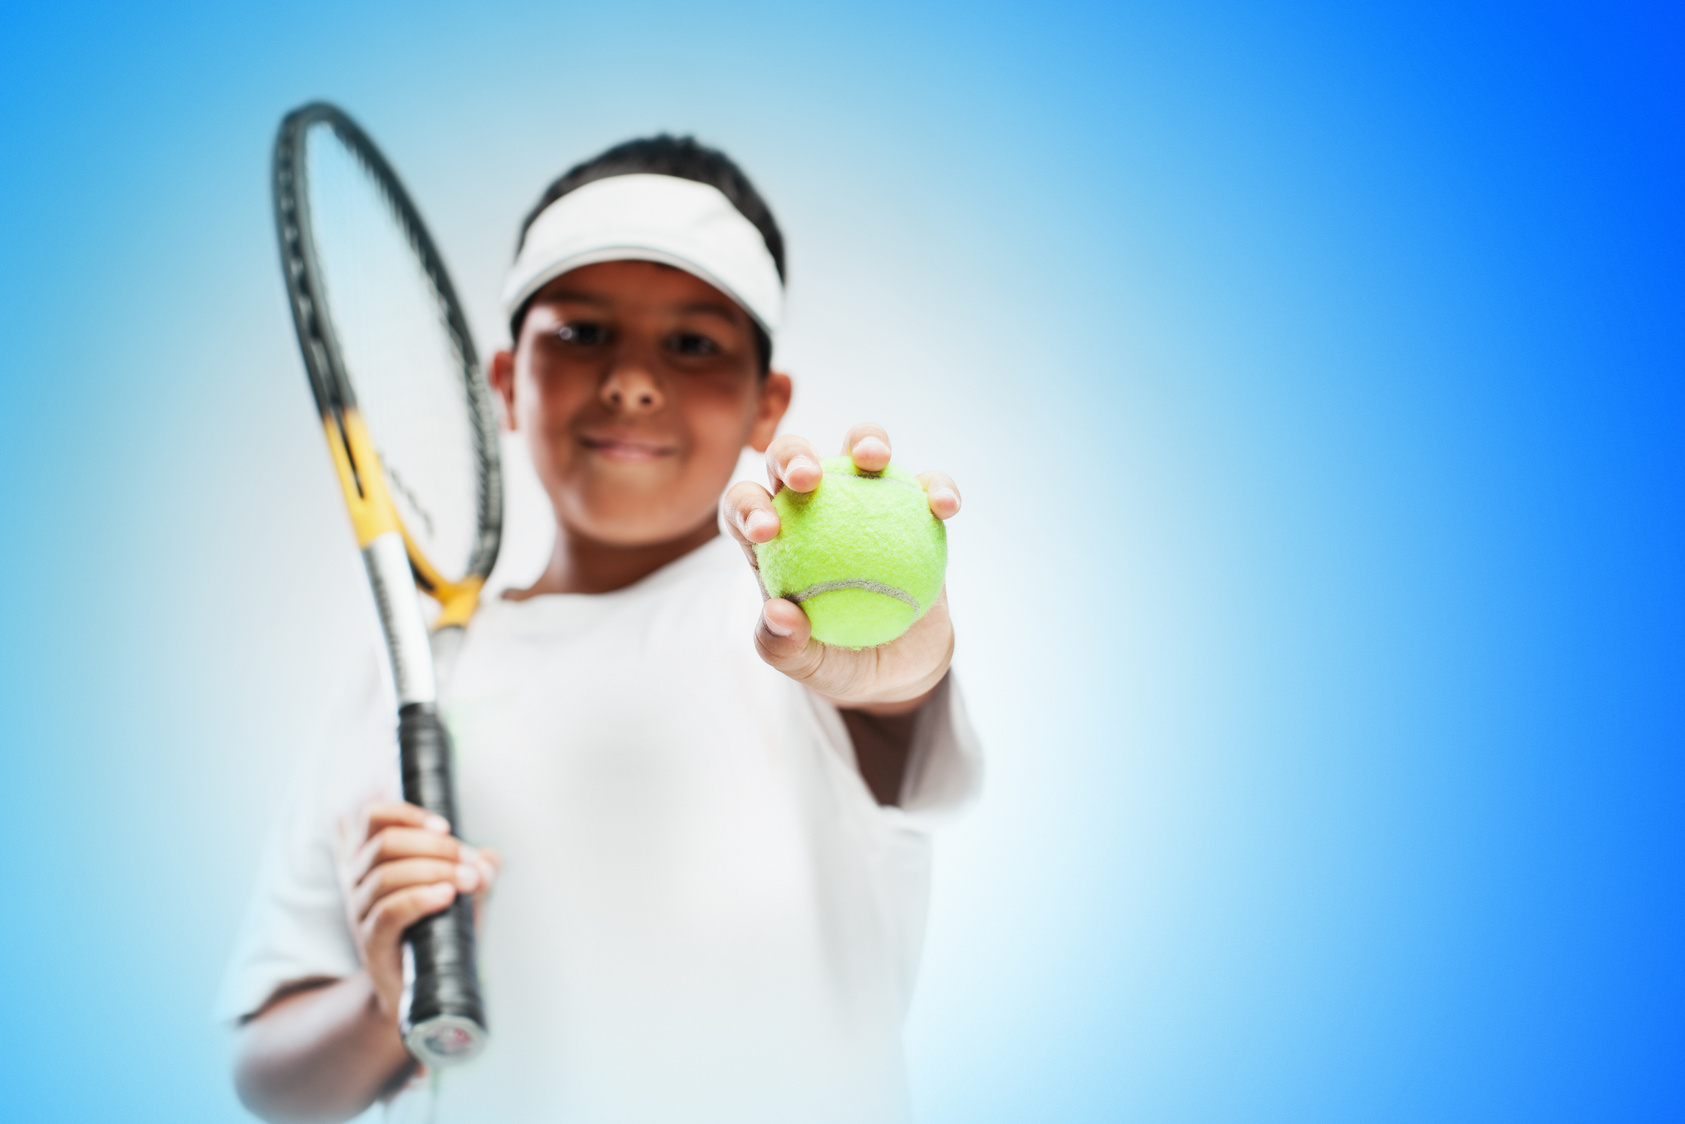 young tennis player